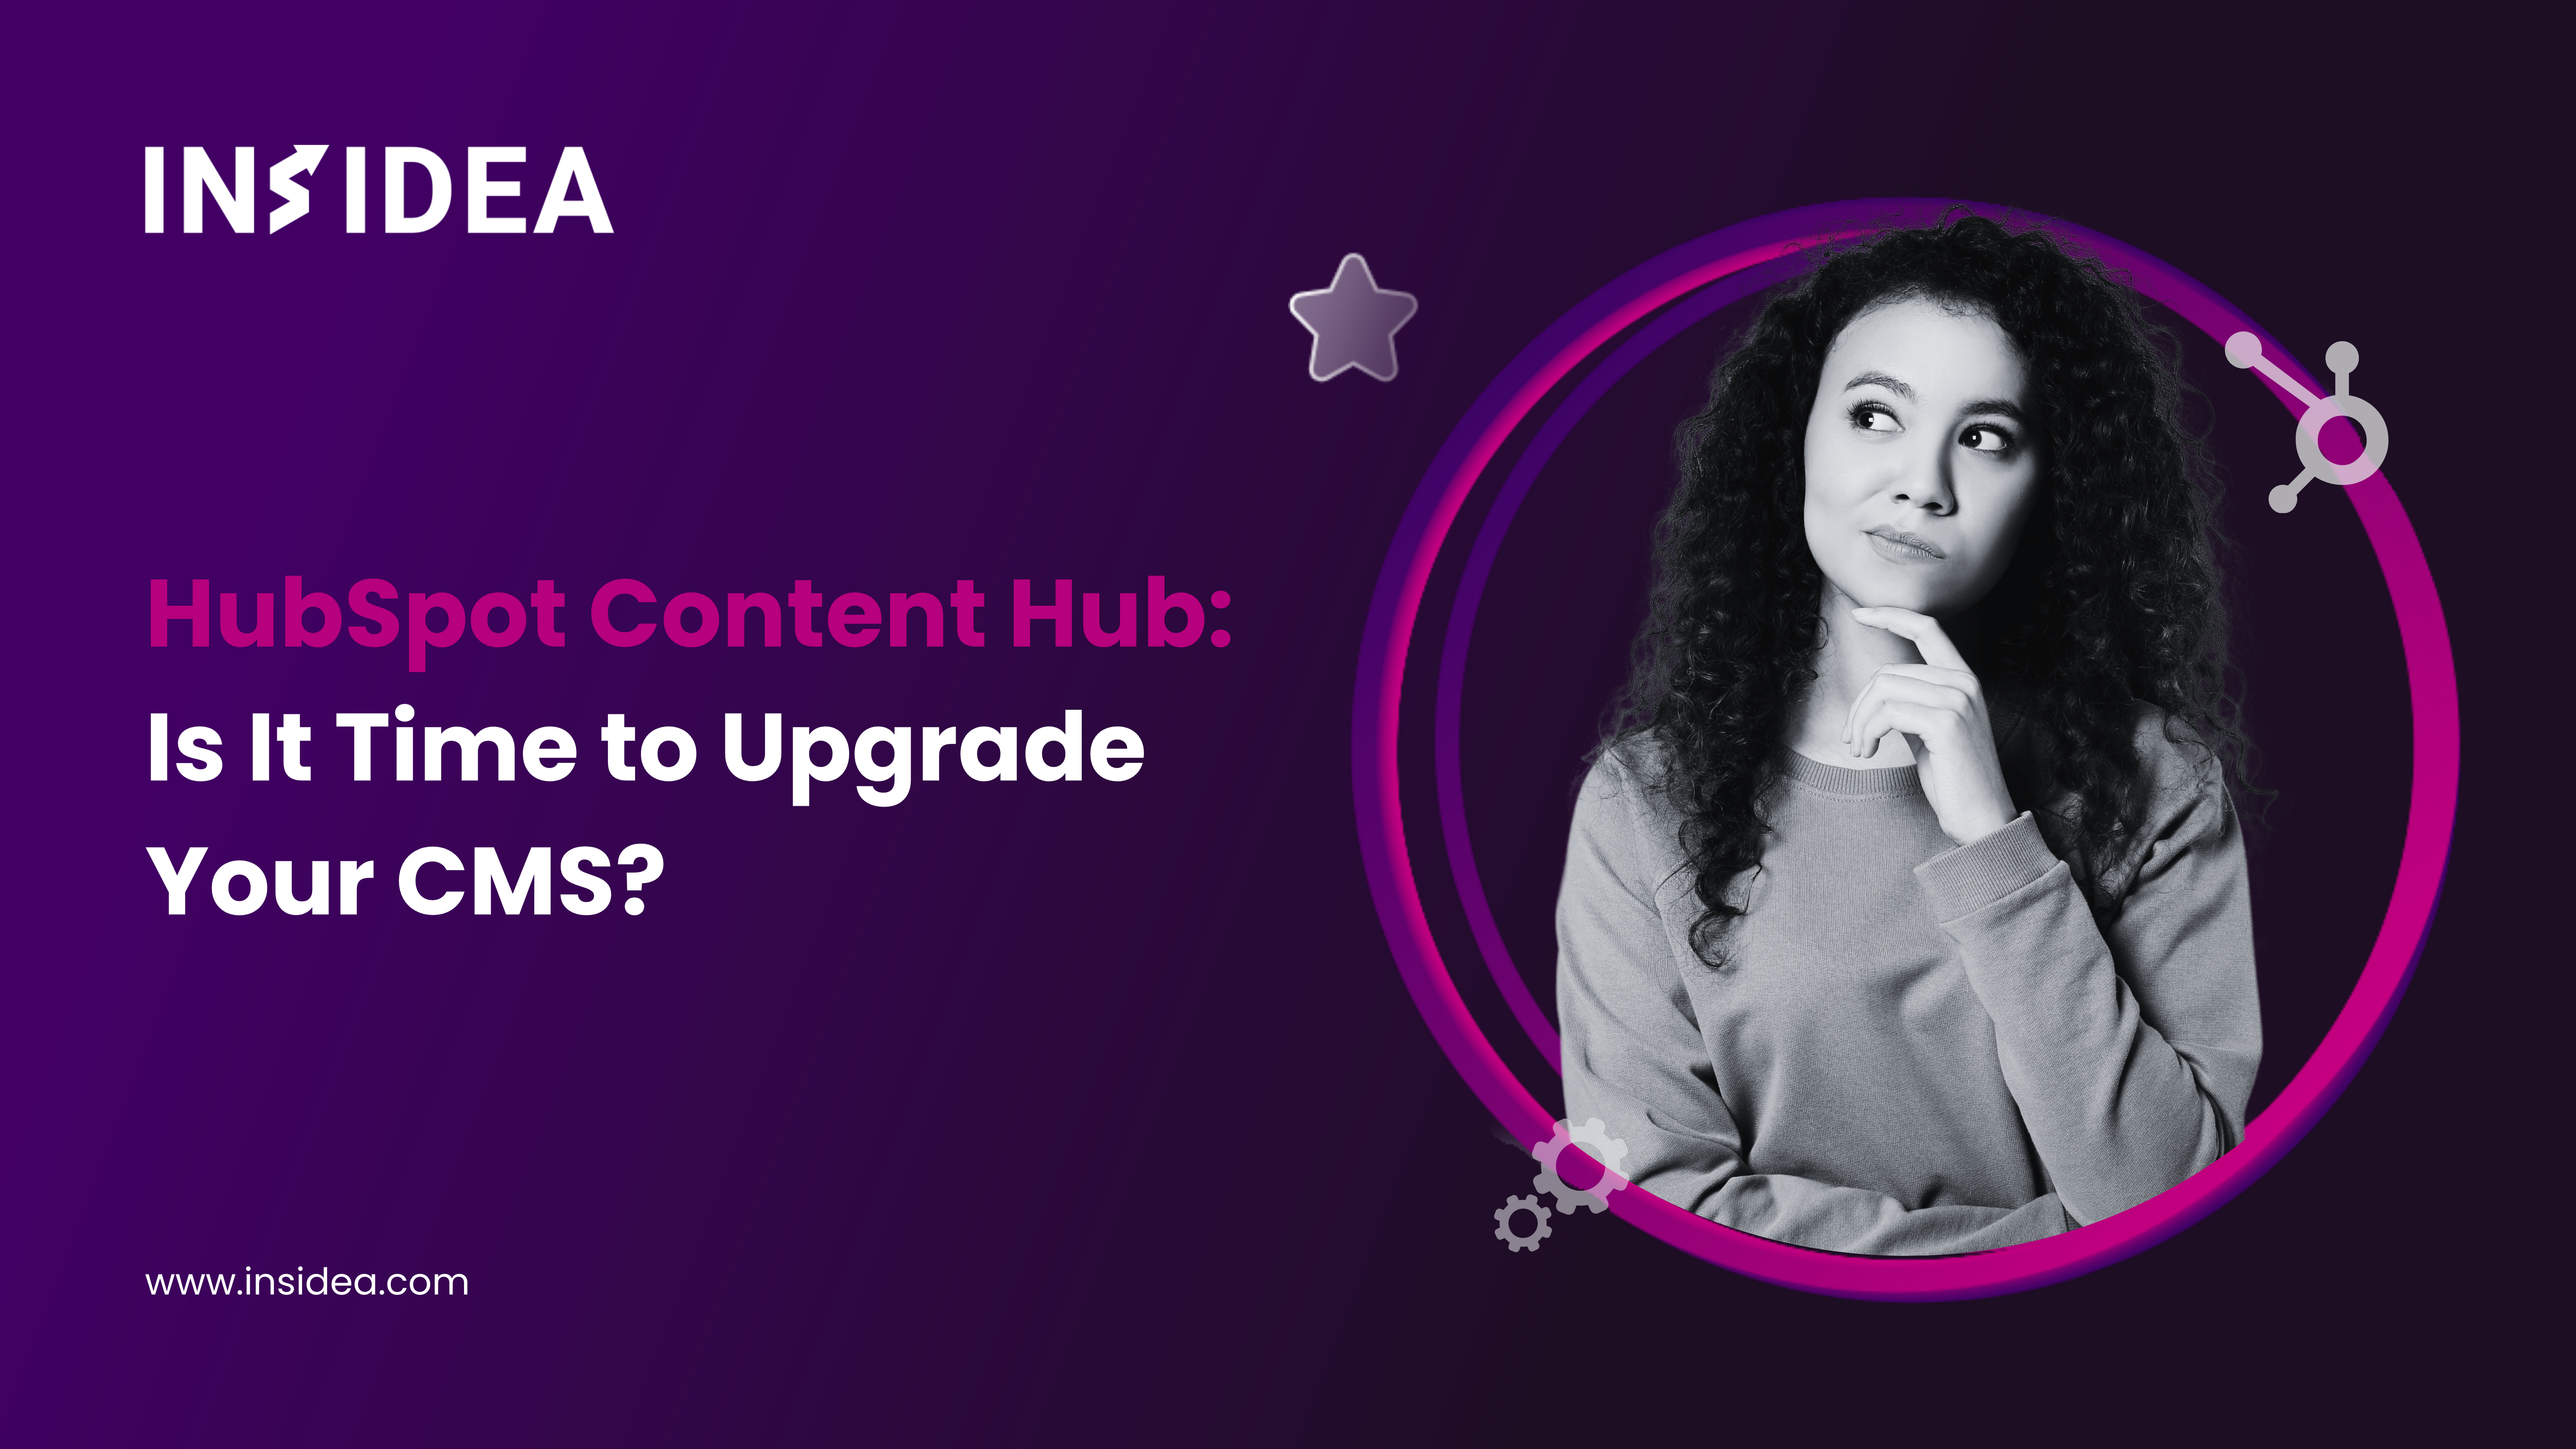 HubSpot Content Hub Is It Time to Upgrade Your CMS